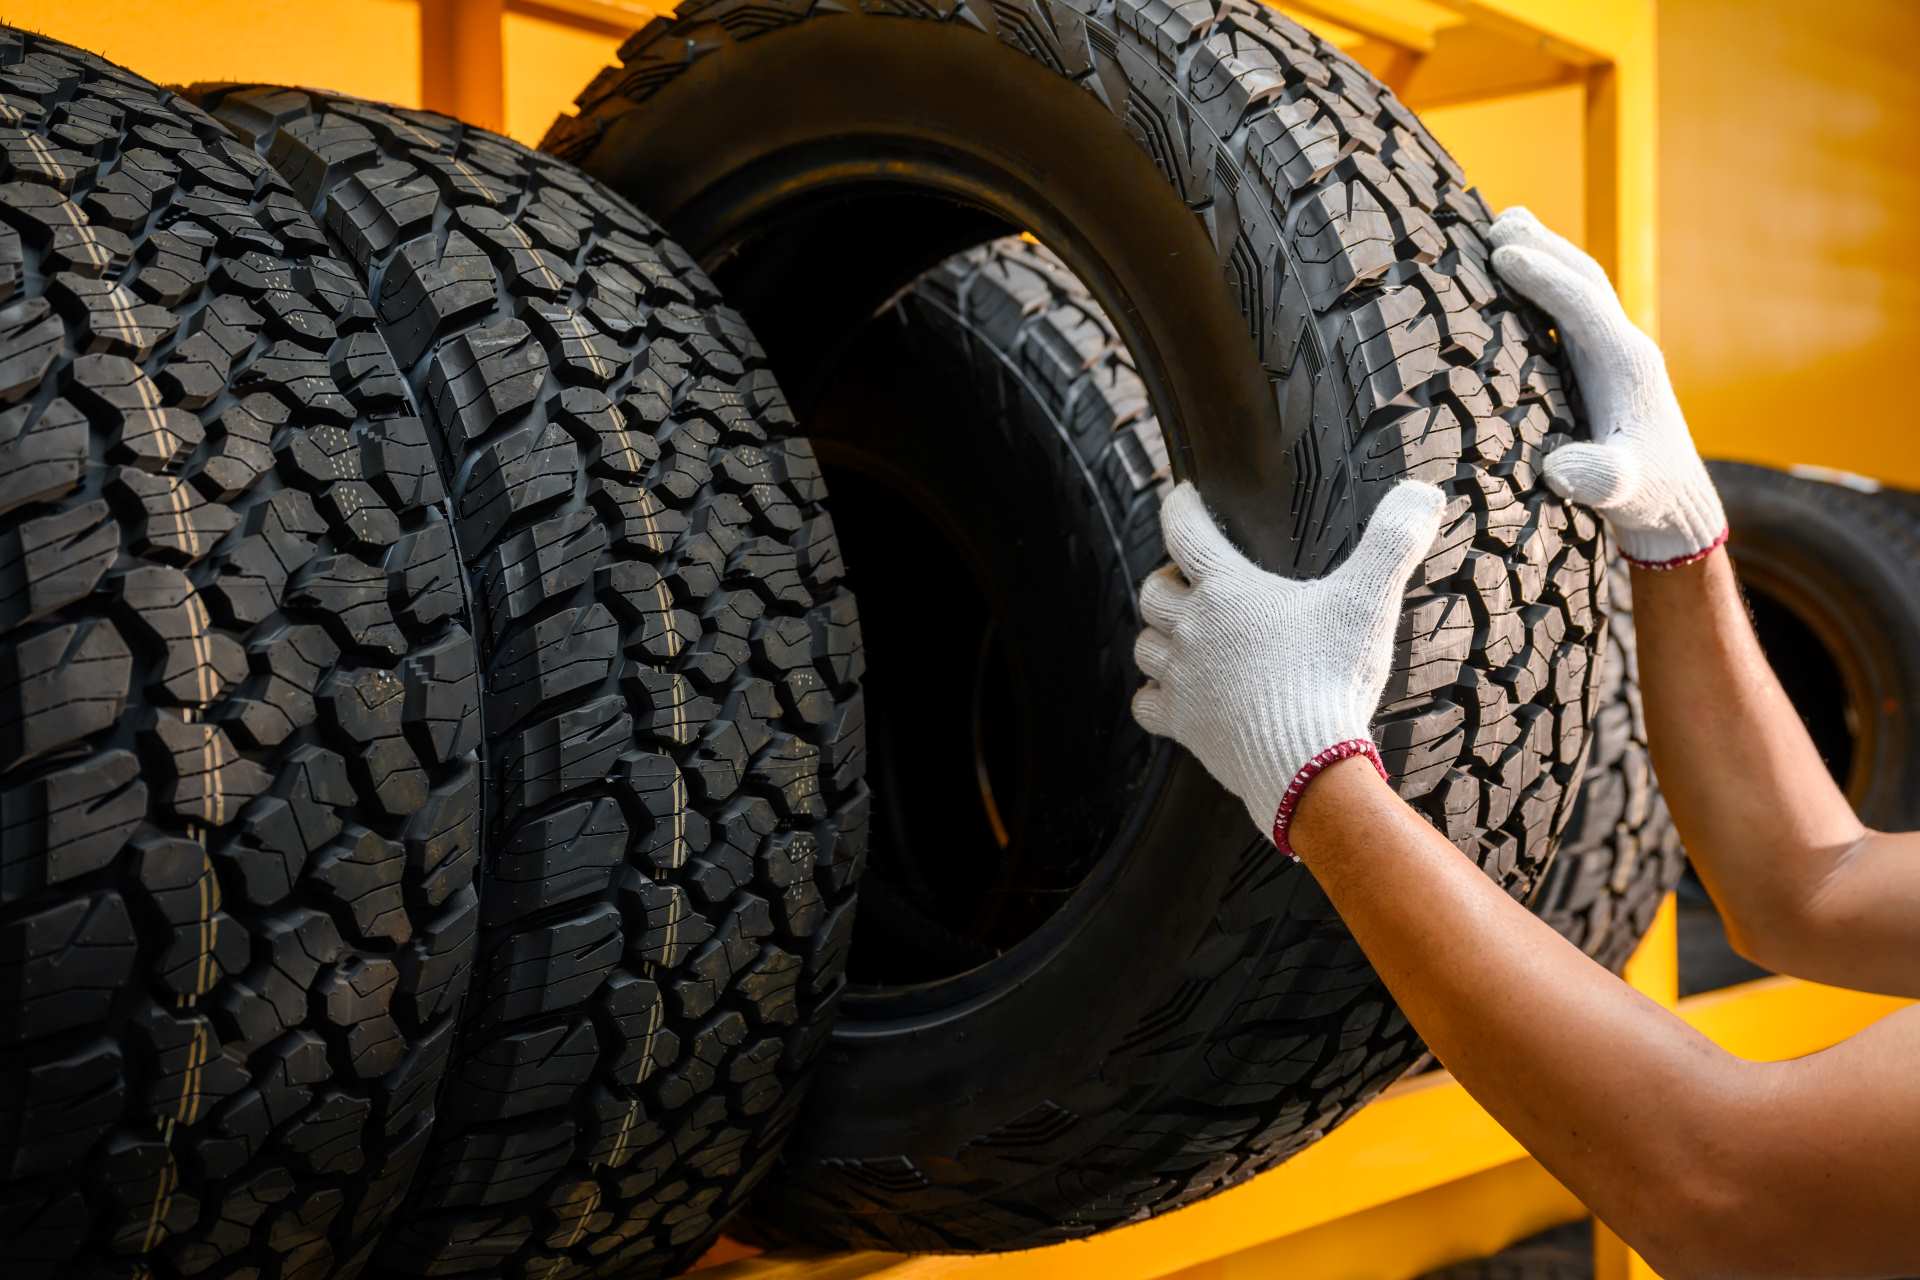 a truck services employee wearing shop gloves pulling oversized aftermarket tires off a shelf